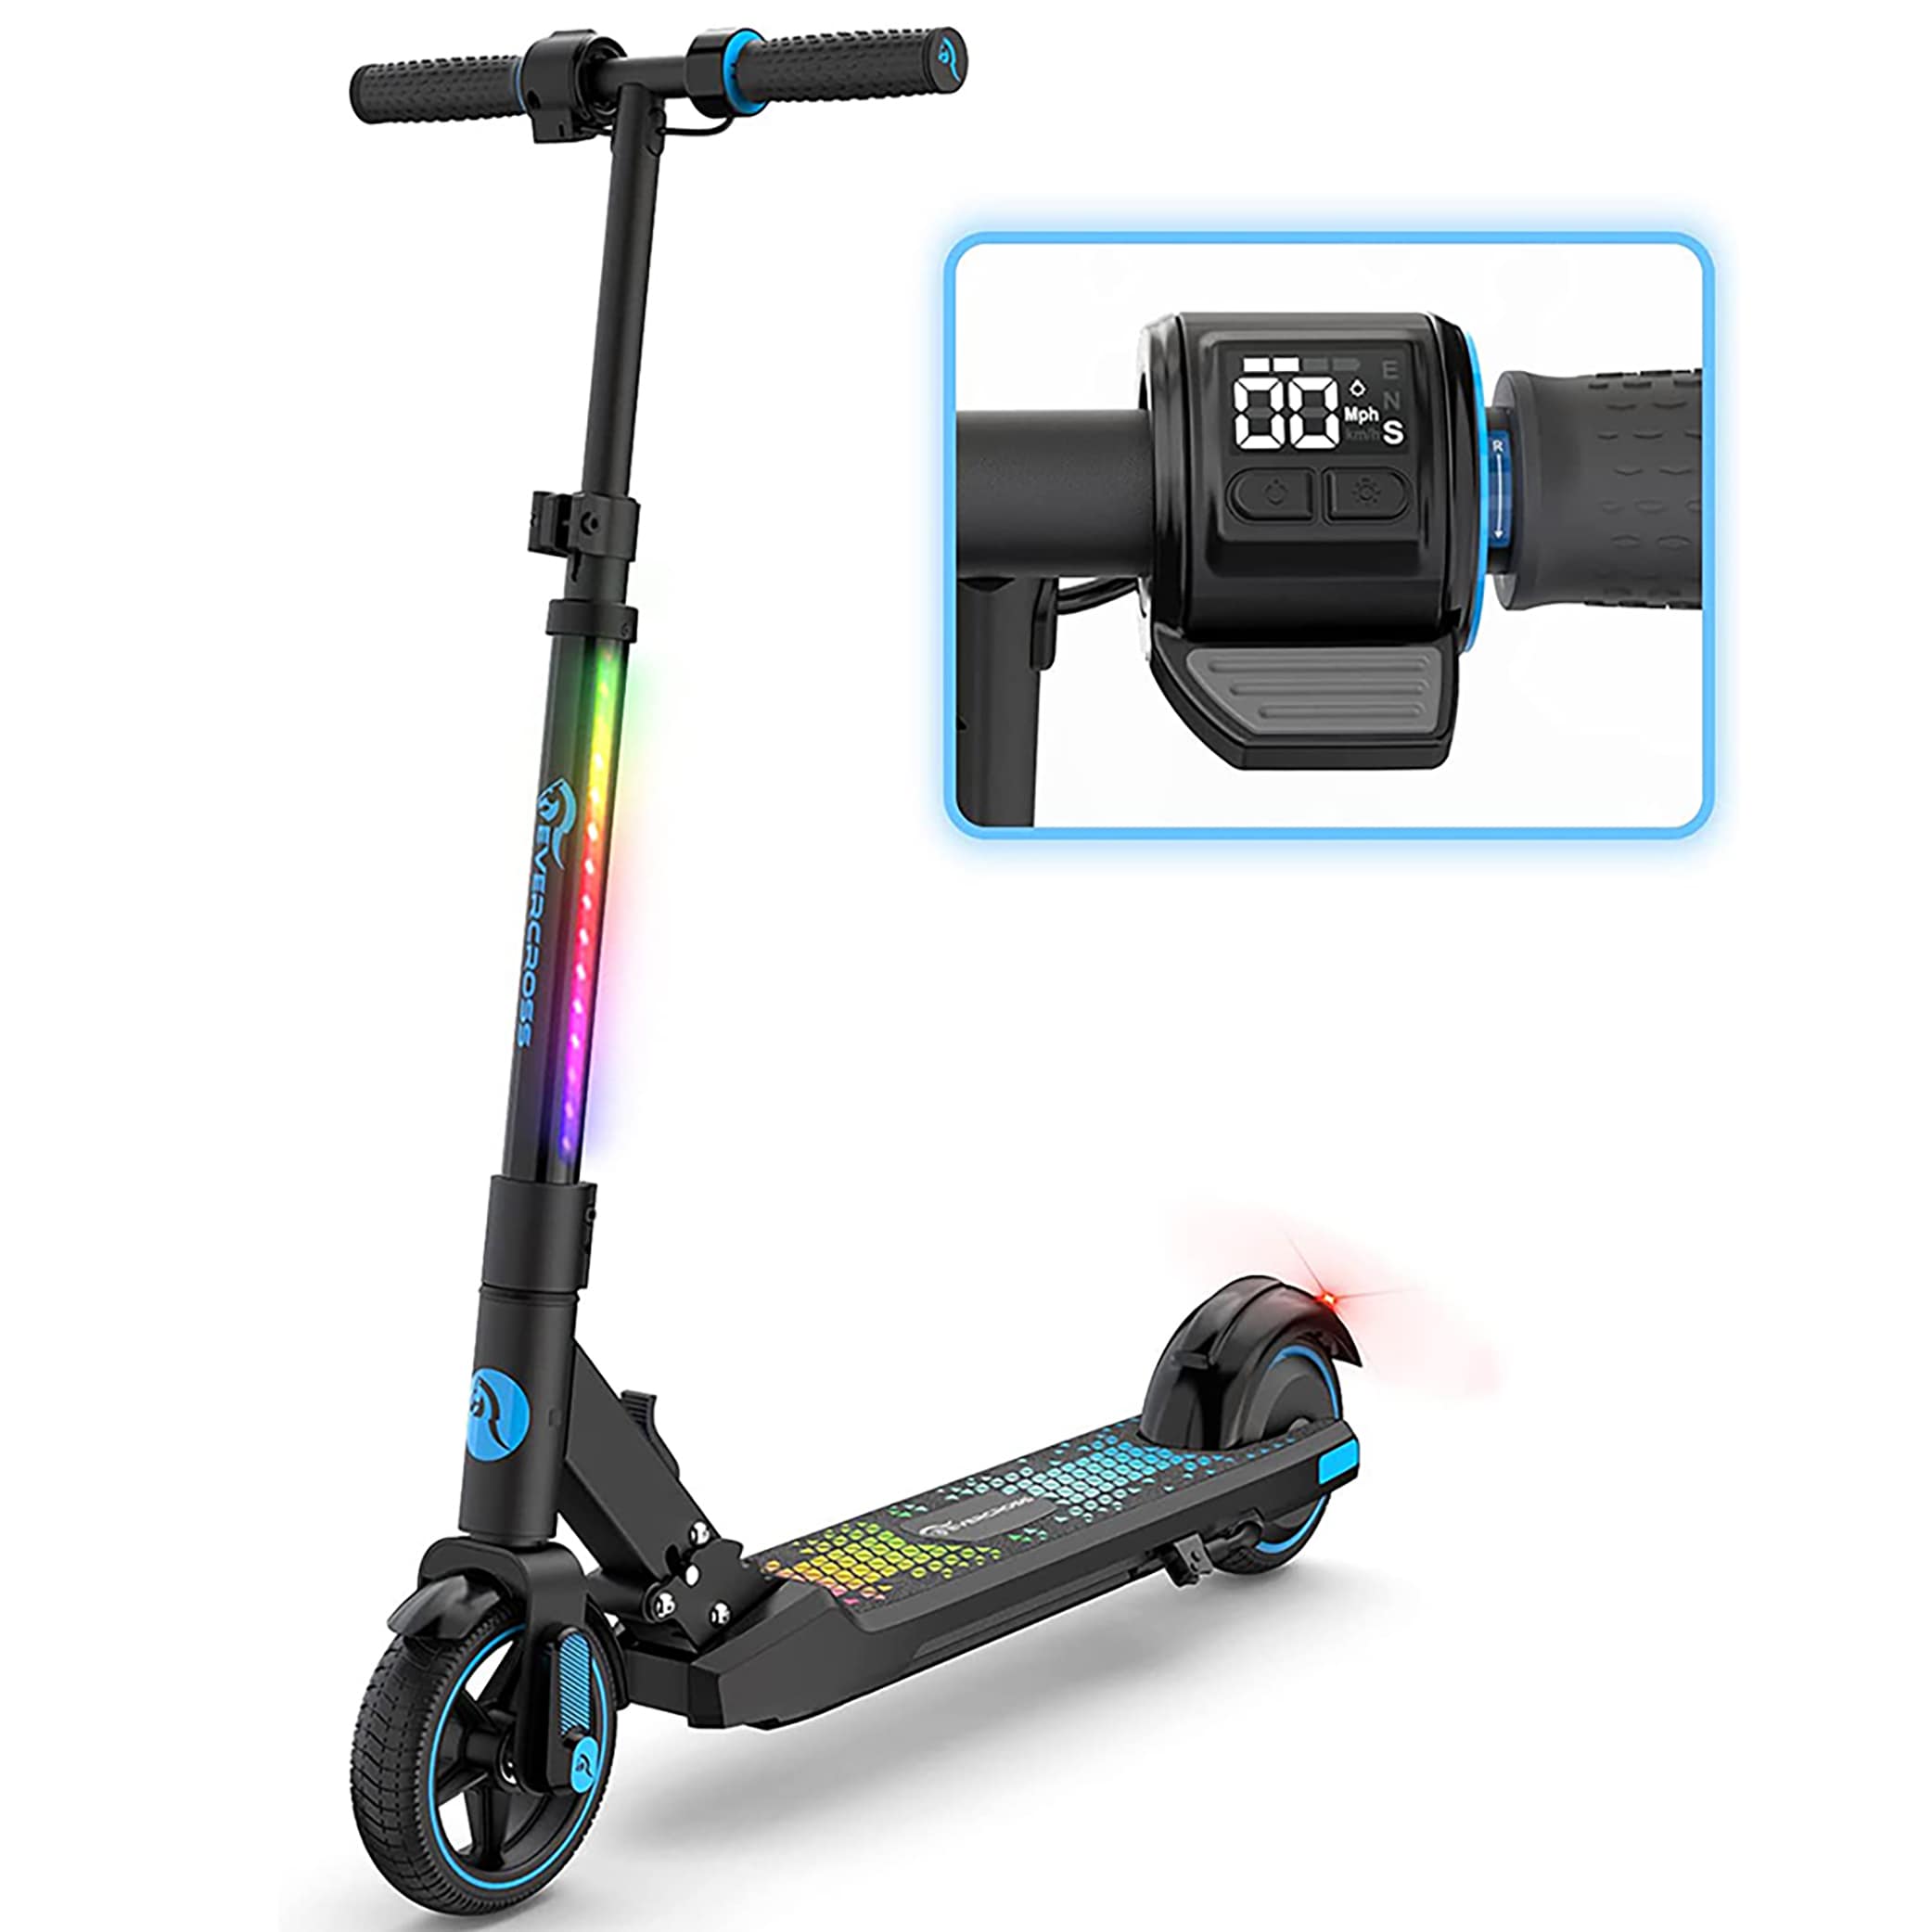 EVERCROSS Evercross Ev06c, Foldable Electric Scooter For Kids Ages 6-12, Up To 9.3-MPH and 5-Mile, LED Display, Colorful Lights, Lightweight in the Scooters department at Lowes.com